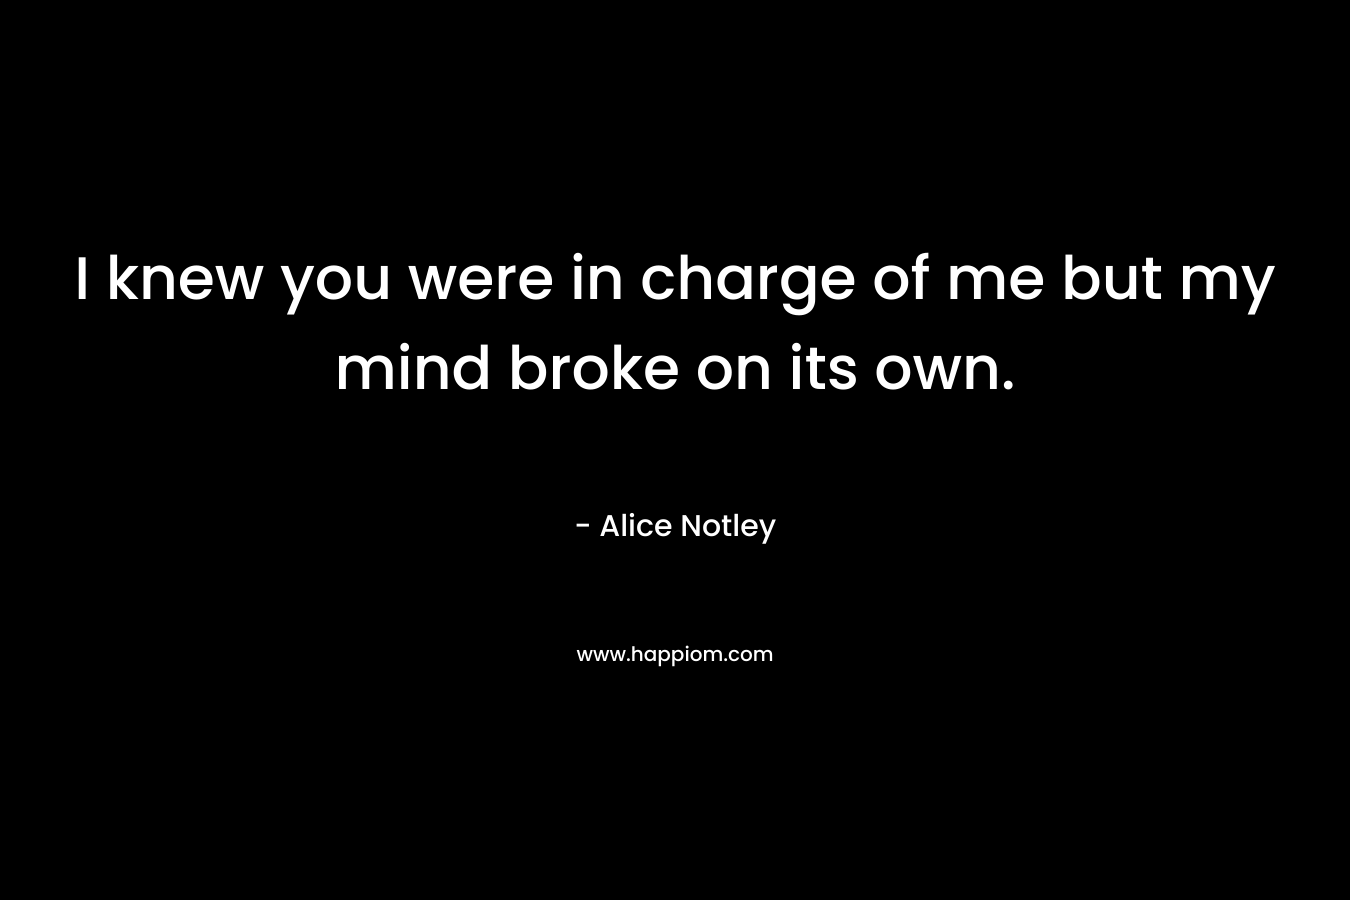 I knew you were in charge of me but my mind broke on its own. – Alice Notley